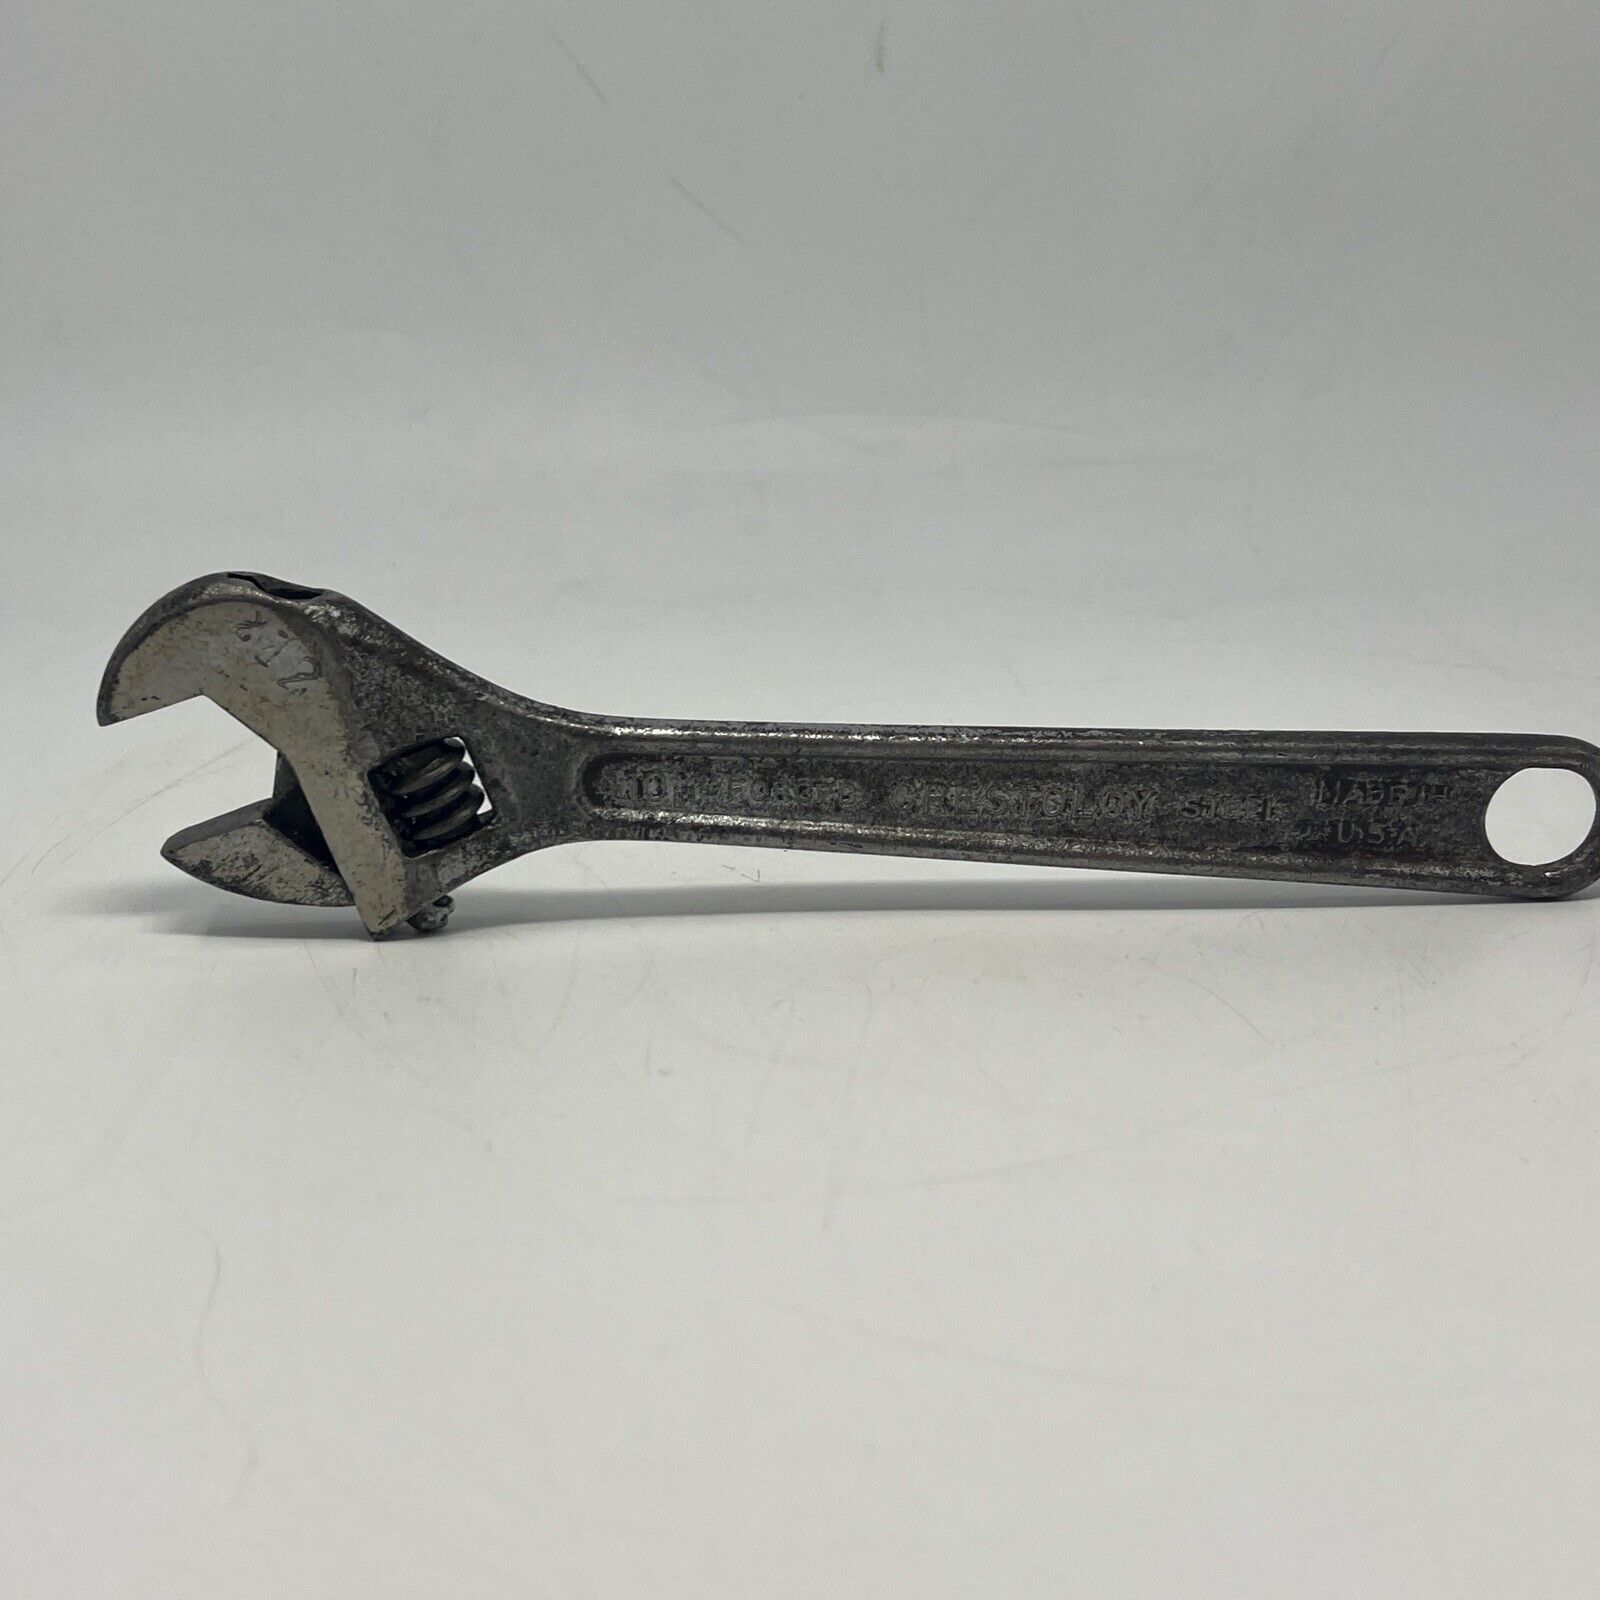 Crescent Tool Co. 10” Forged Crestoloy Wrench Made In Jamestown N.Y. USA Tool